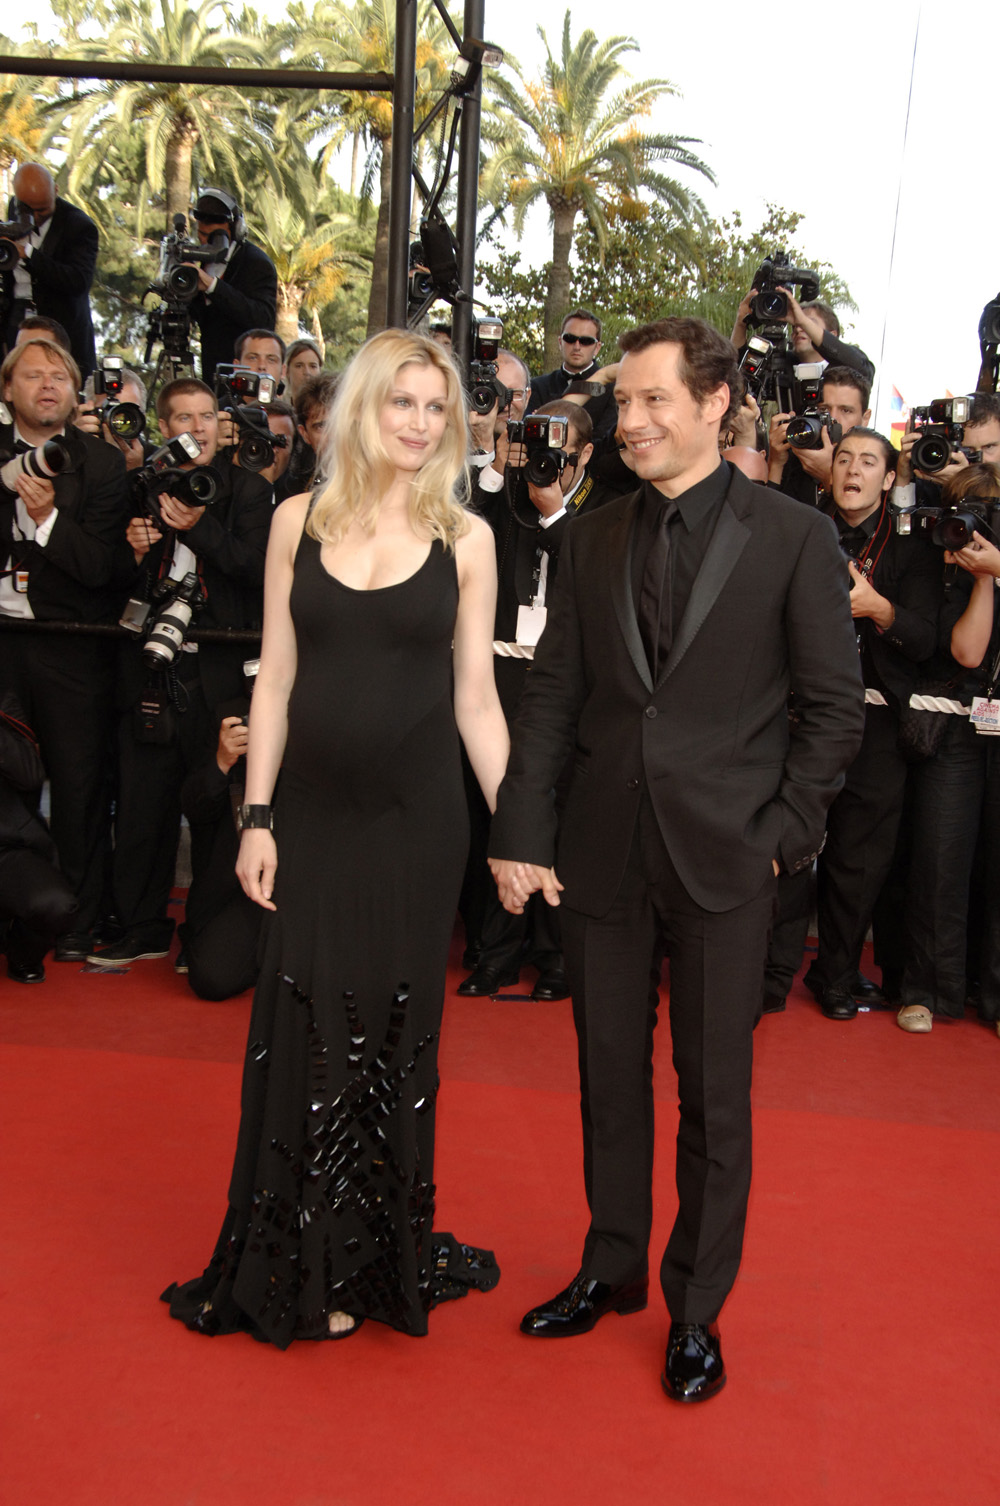 Seen in Cannes: More Red Carpet Photos in Cannes